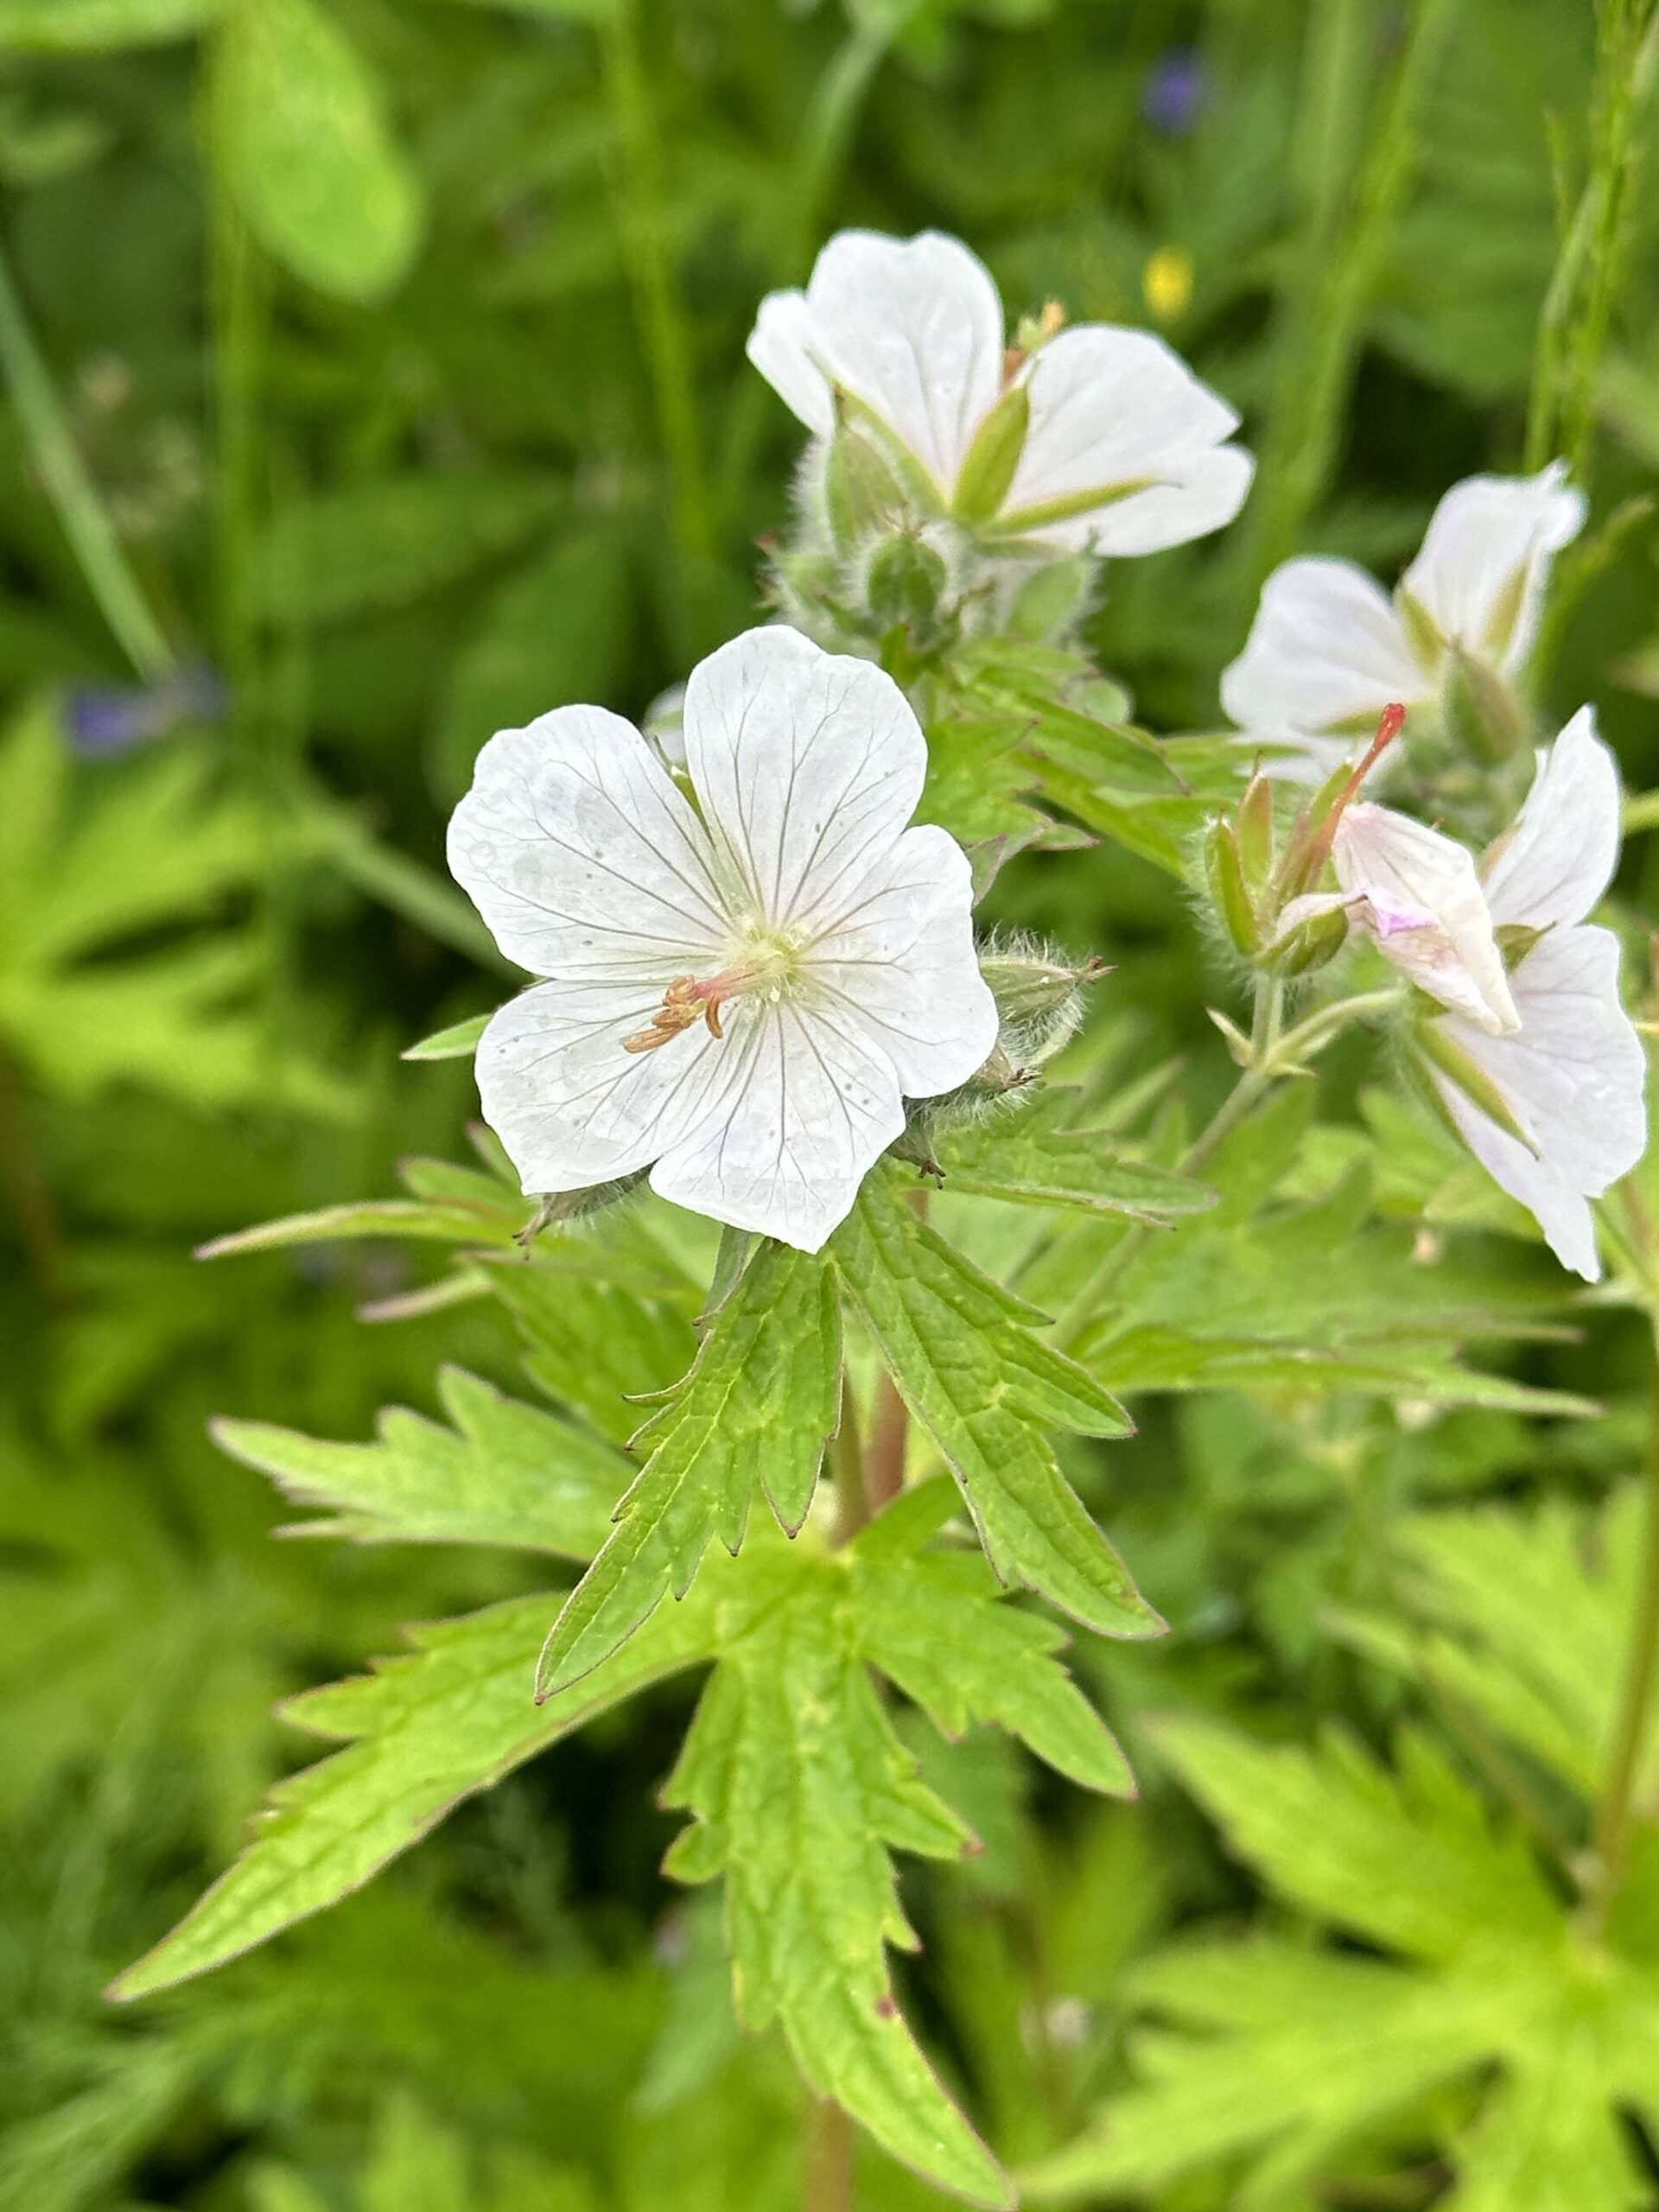 White geraniums on the Point Bridget Trail on June 24. (Photo by Deana Barajas)